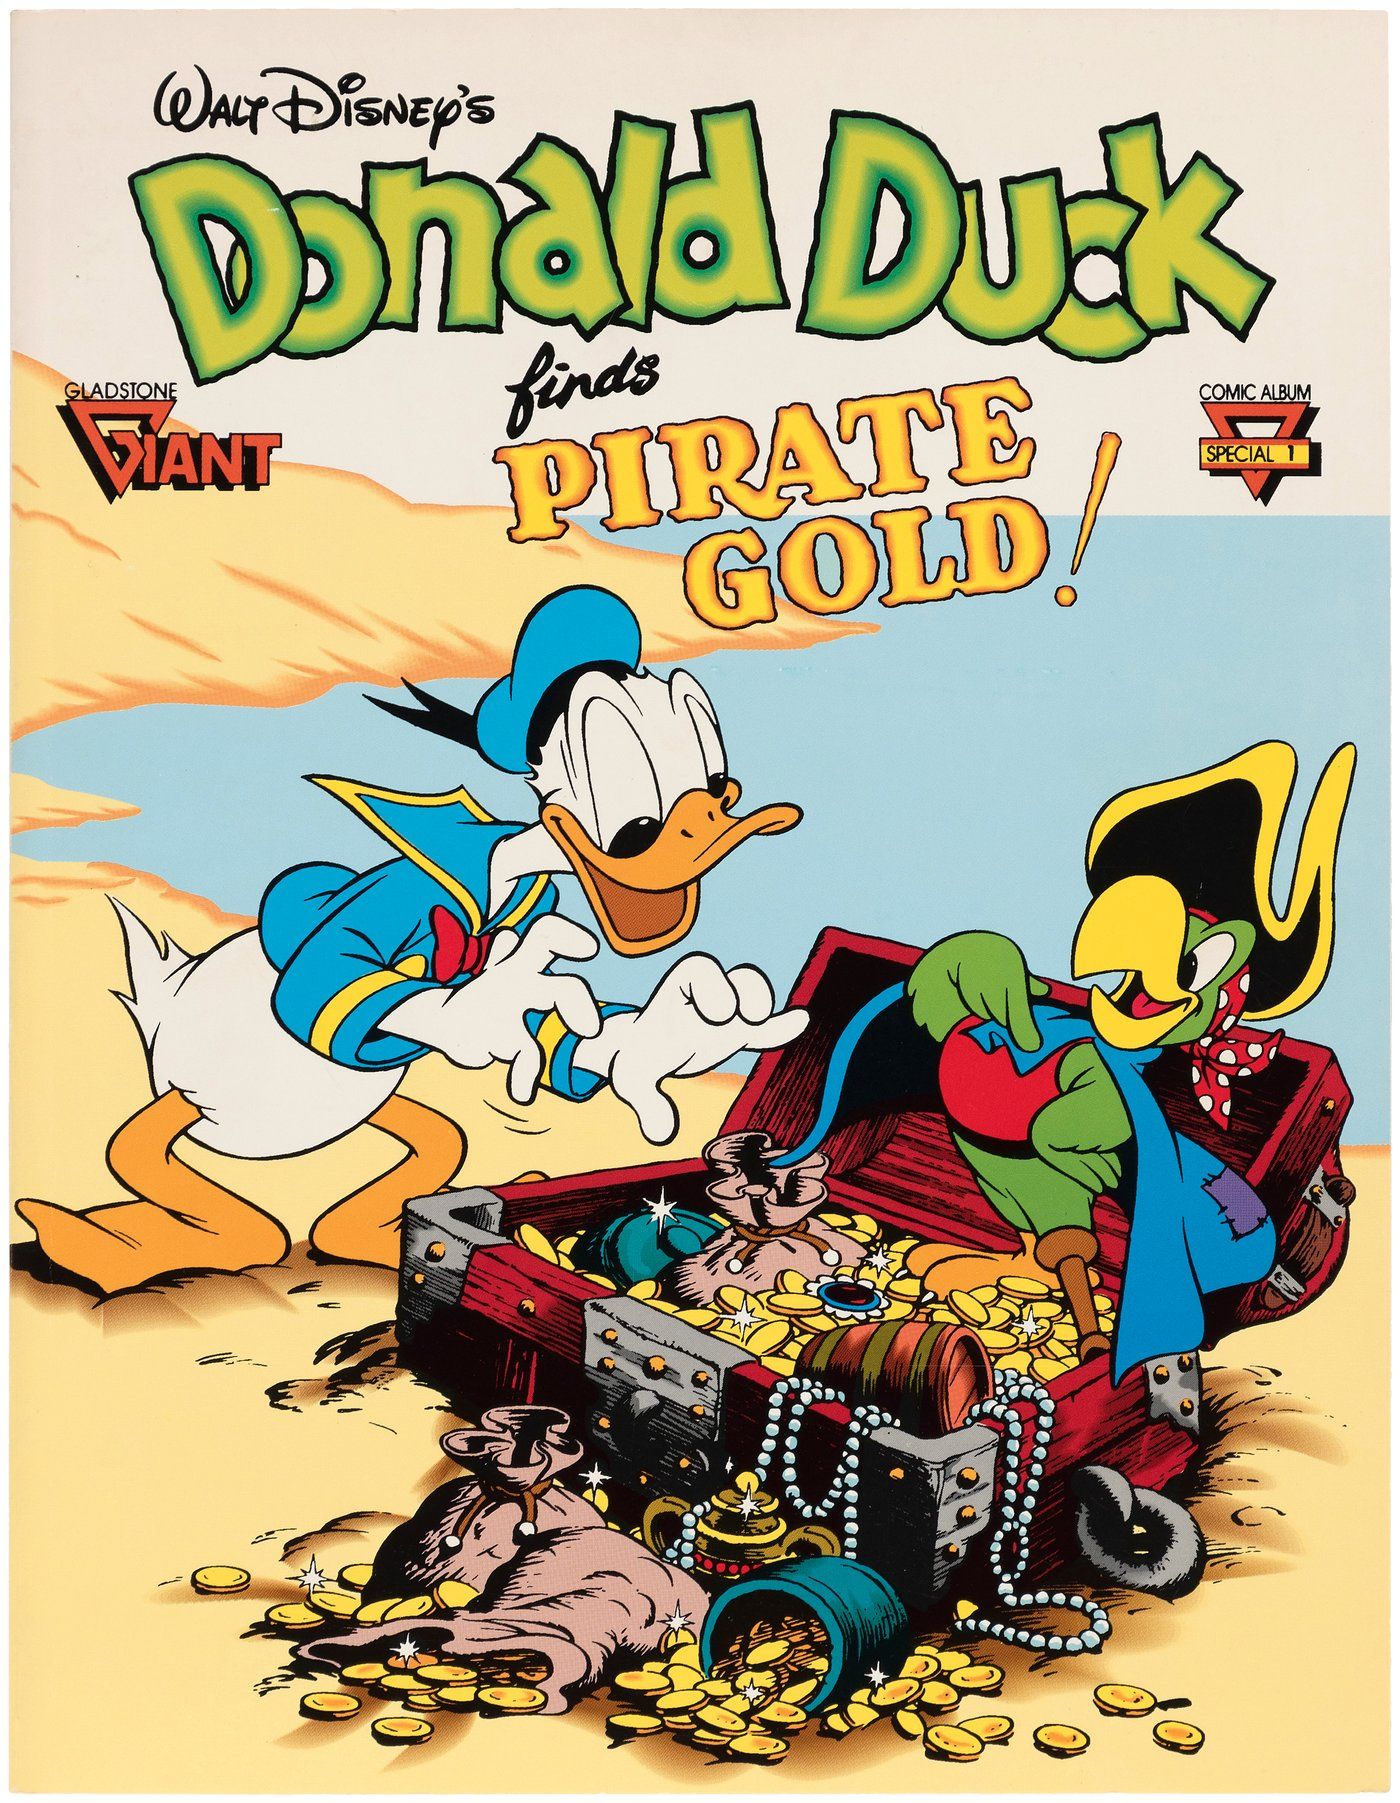 Reprint of "Donald Duck Finds Pirate Gold!" by Gladstone Giant